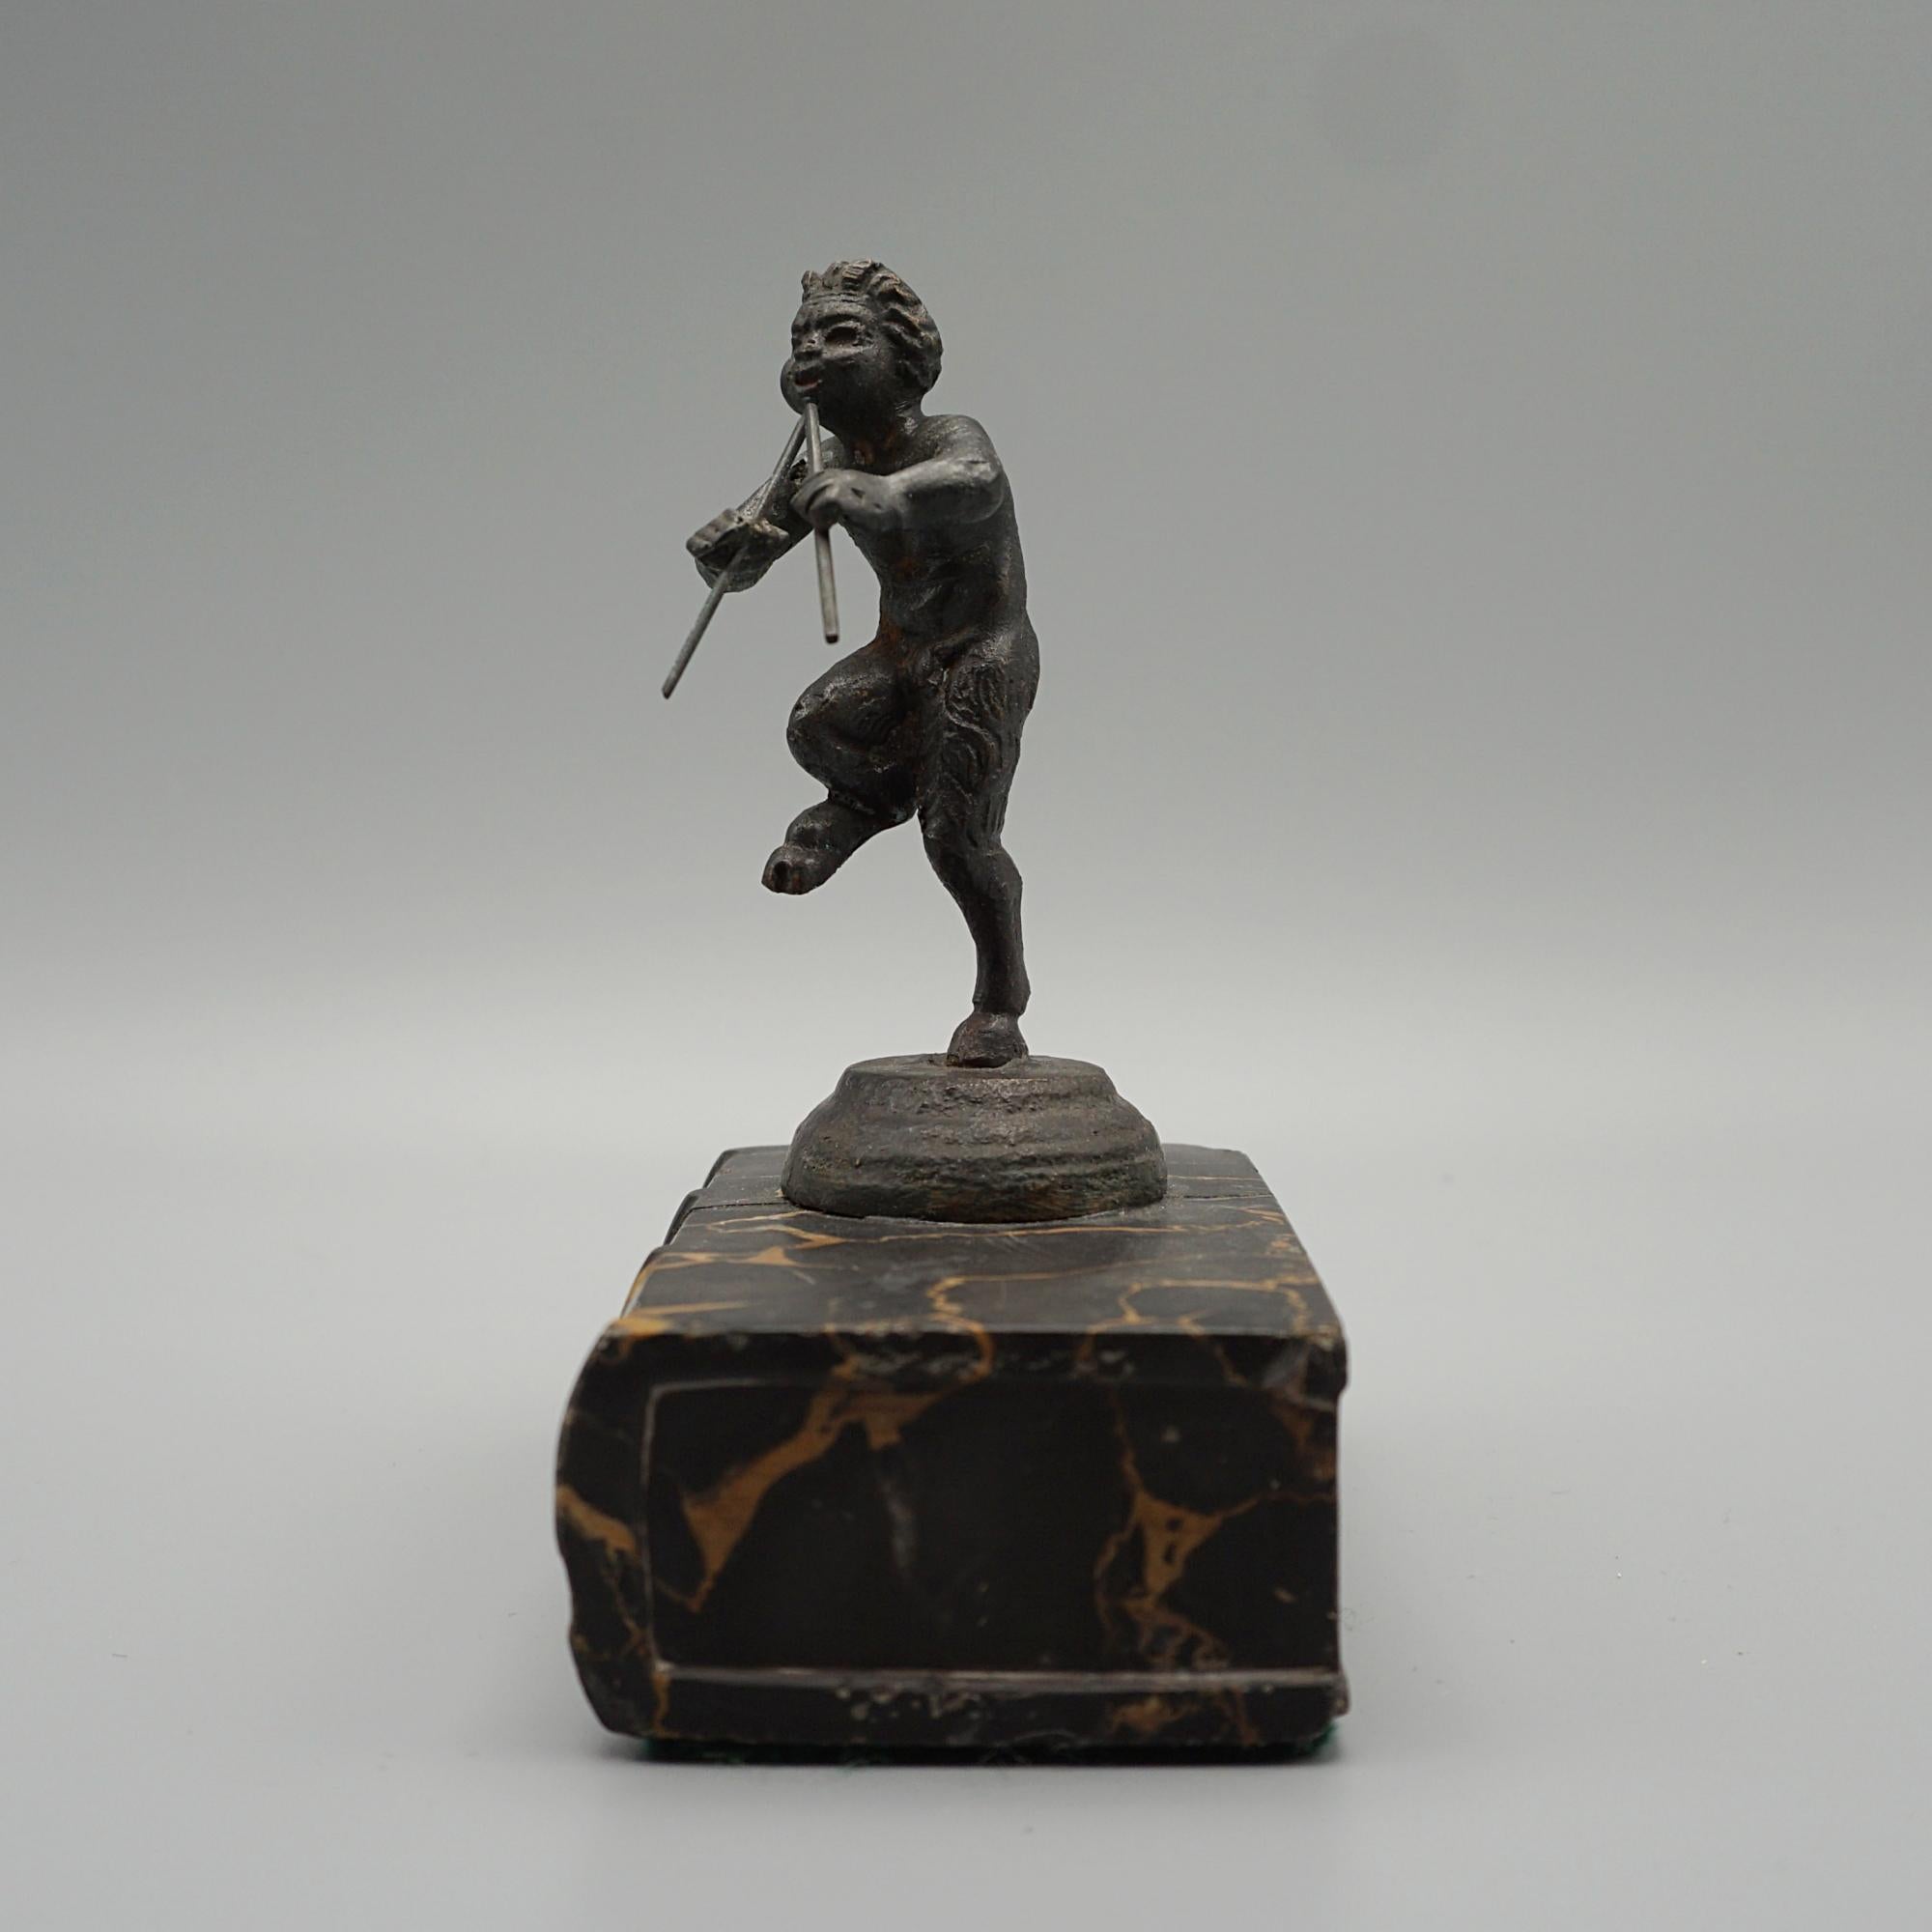 A late 19th century Grand Tour figure of Pan playing the pipes atop a marble book base. Bronze and marble. 



